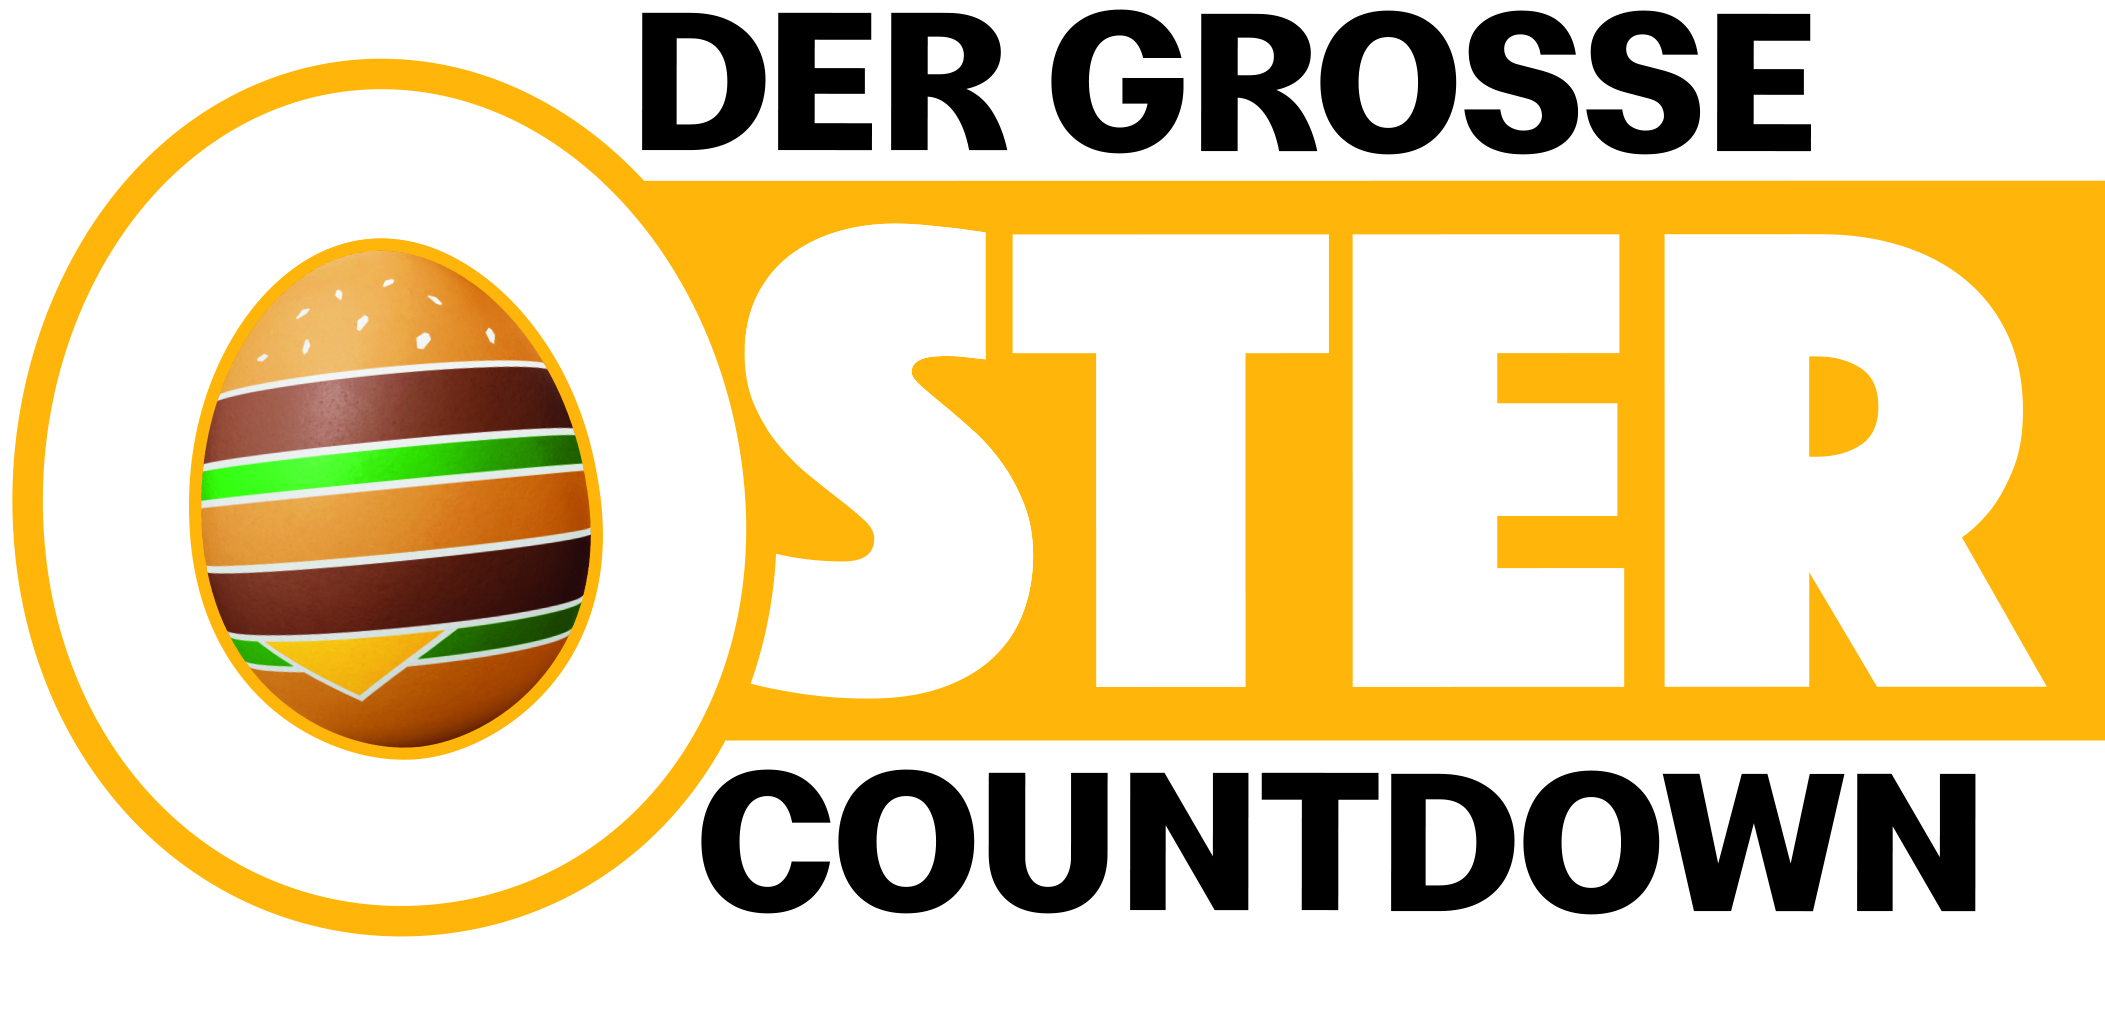 Oster-Countdown